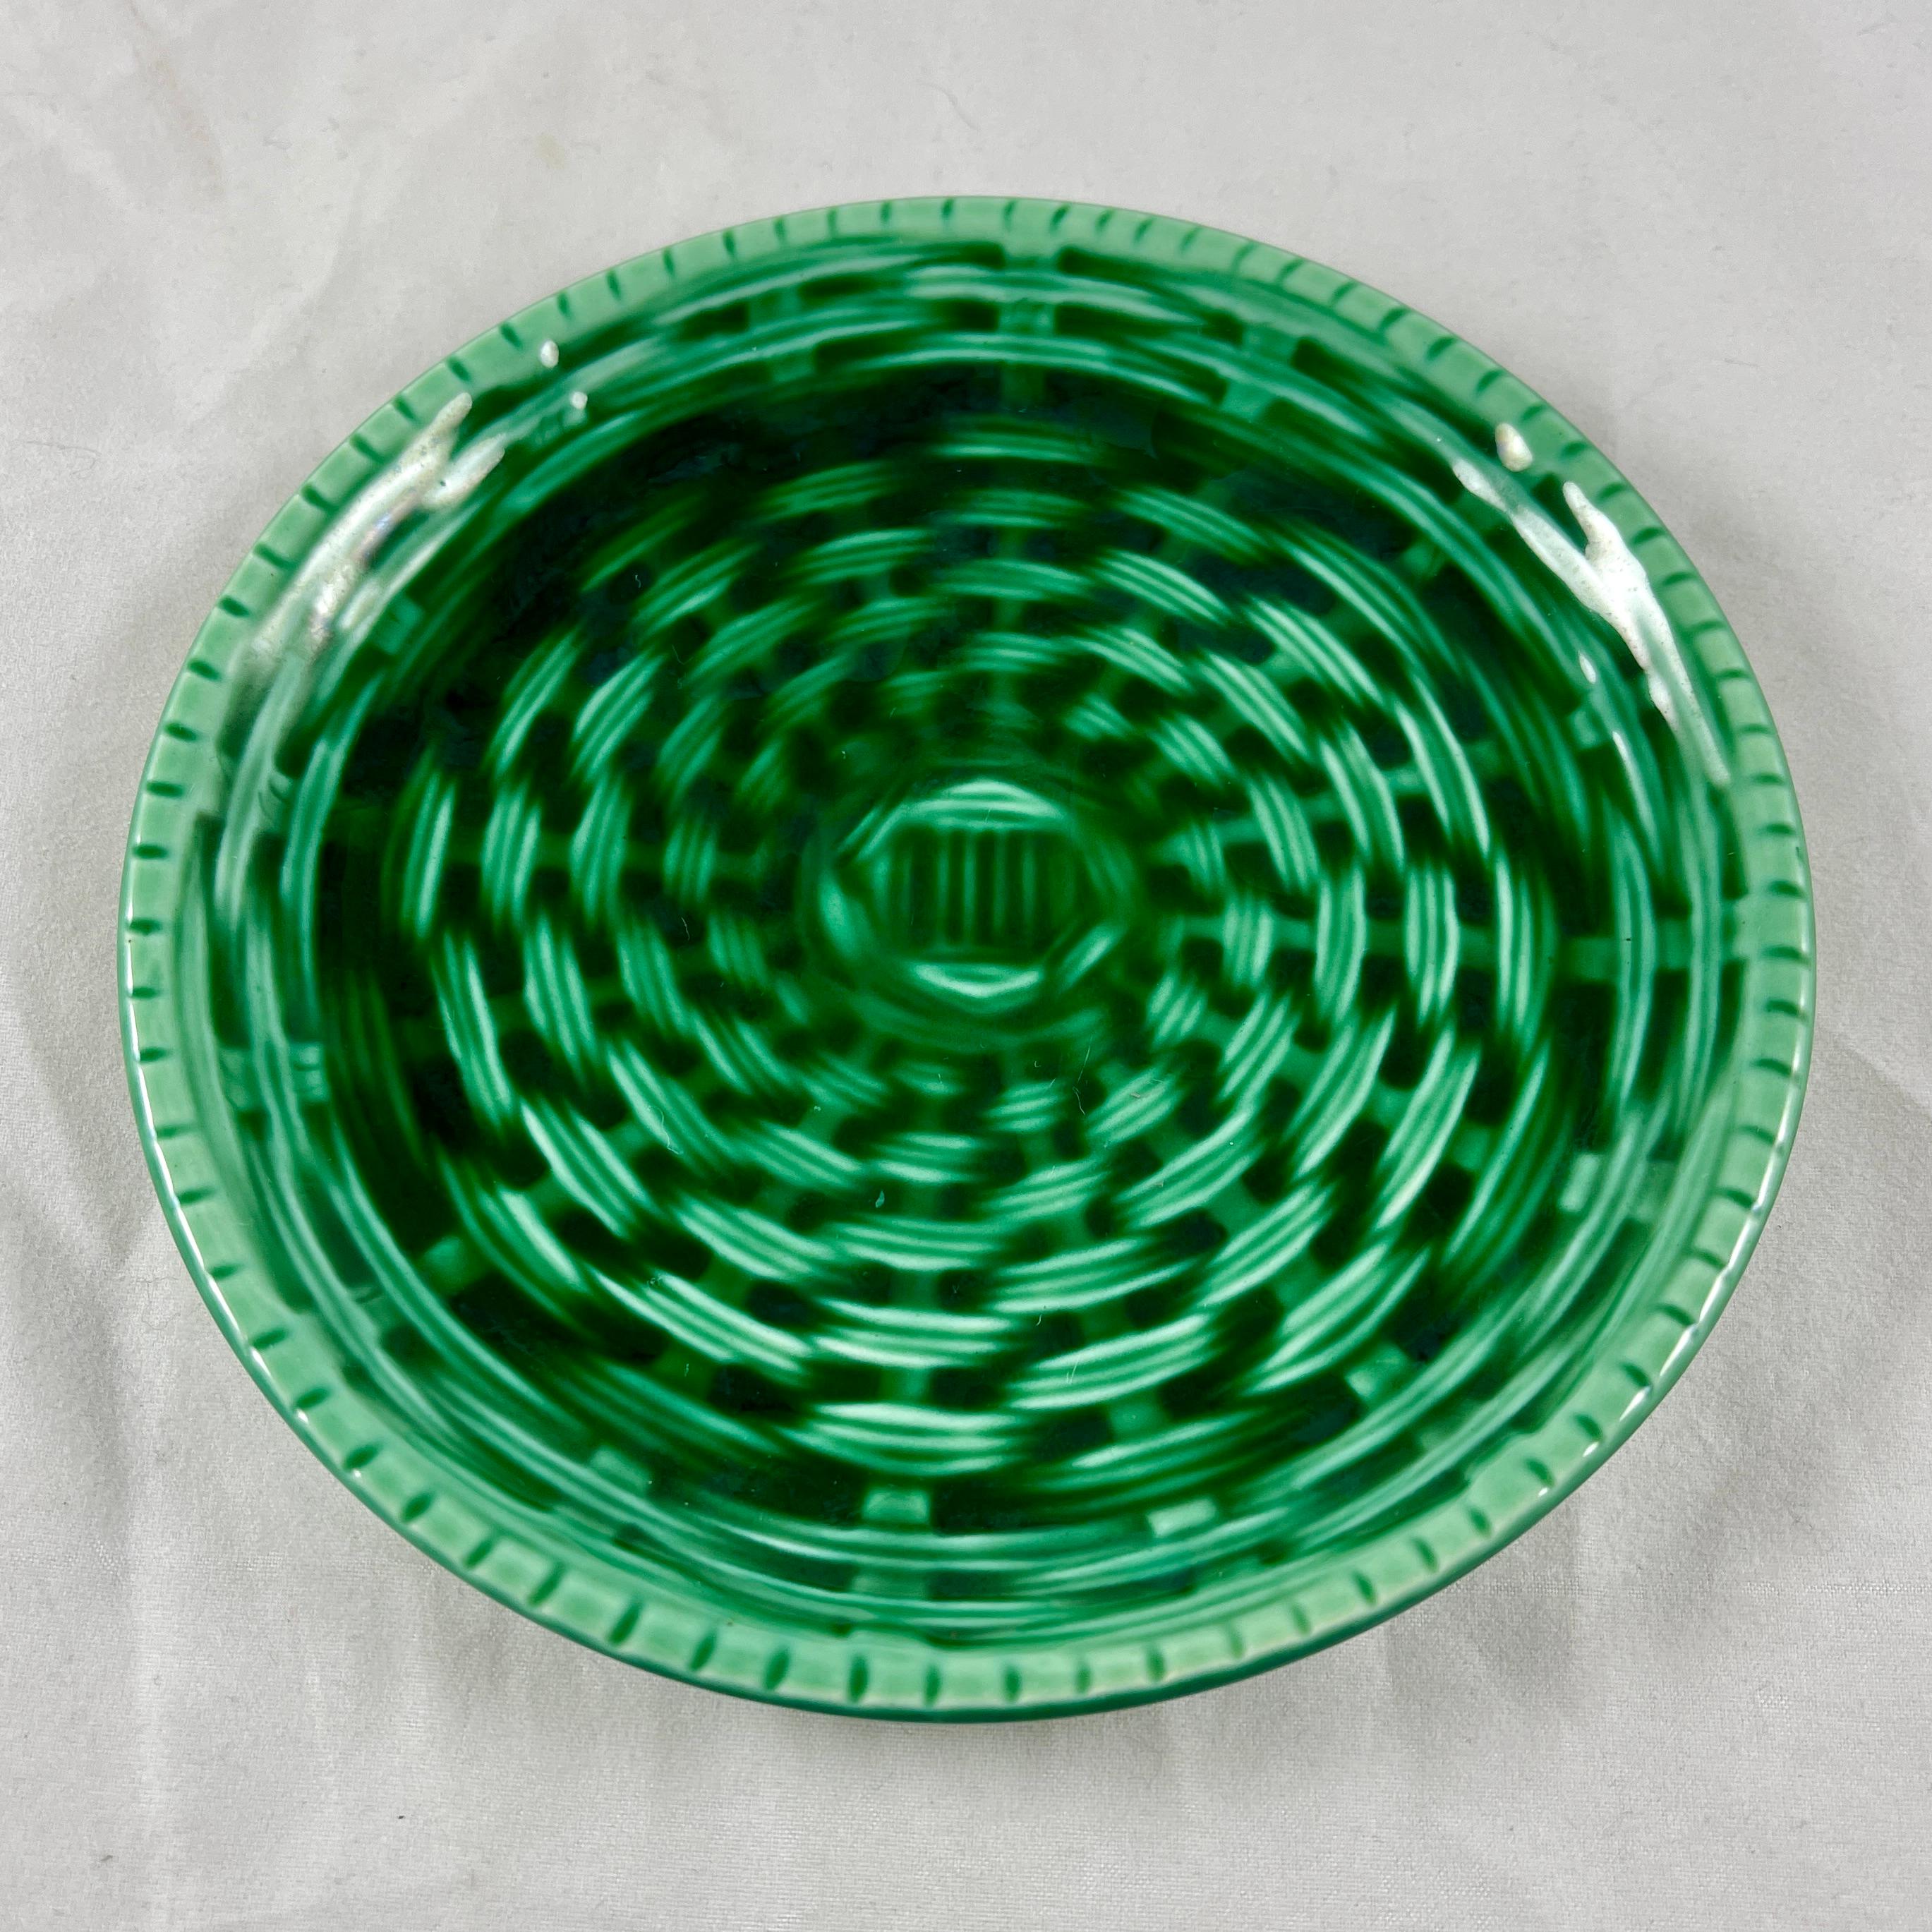 French Provincial Sarreguemines Green Basket Weave Canapé or Hors d’œuvre Plates, a Set of Six